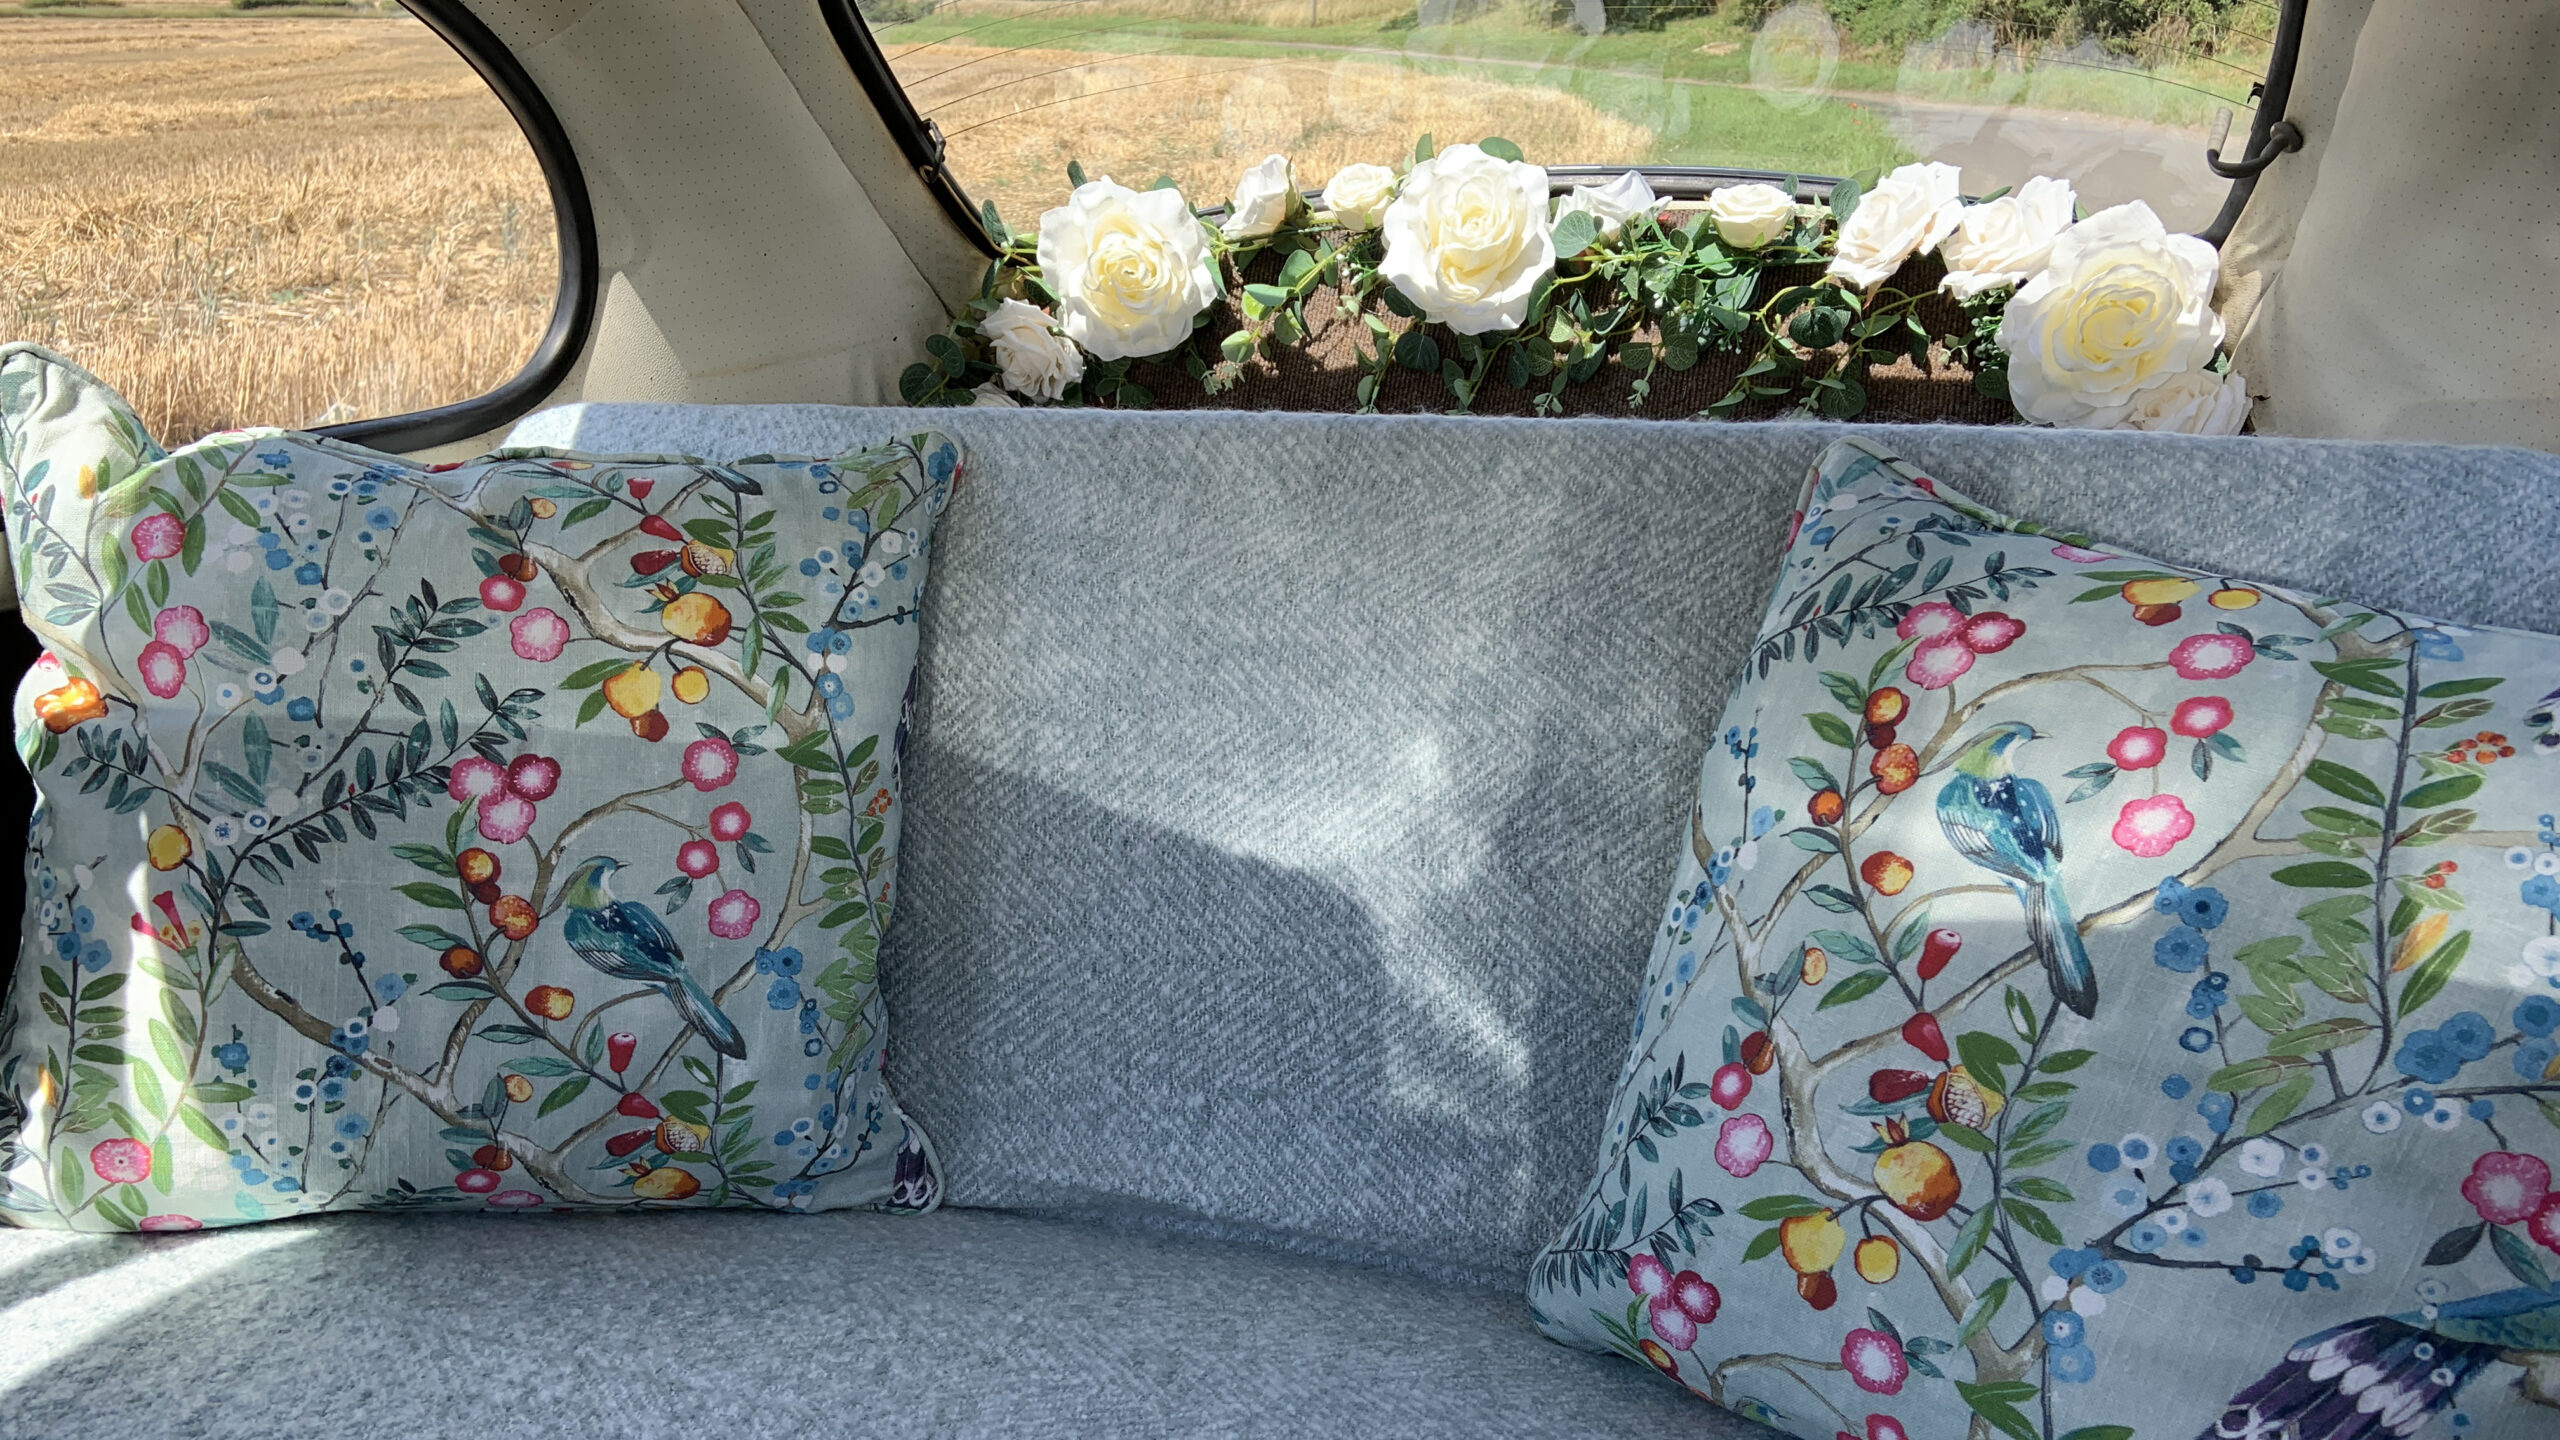 Classic Beetle rear interior view with Cushions and Flower Decoration